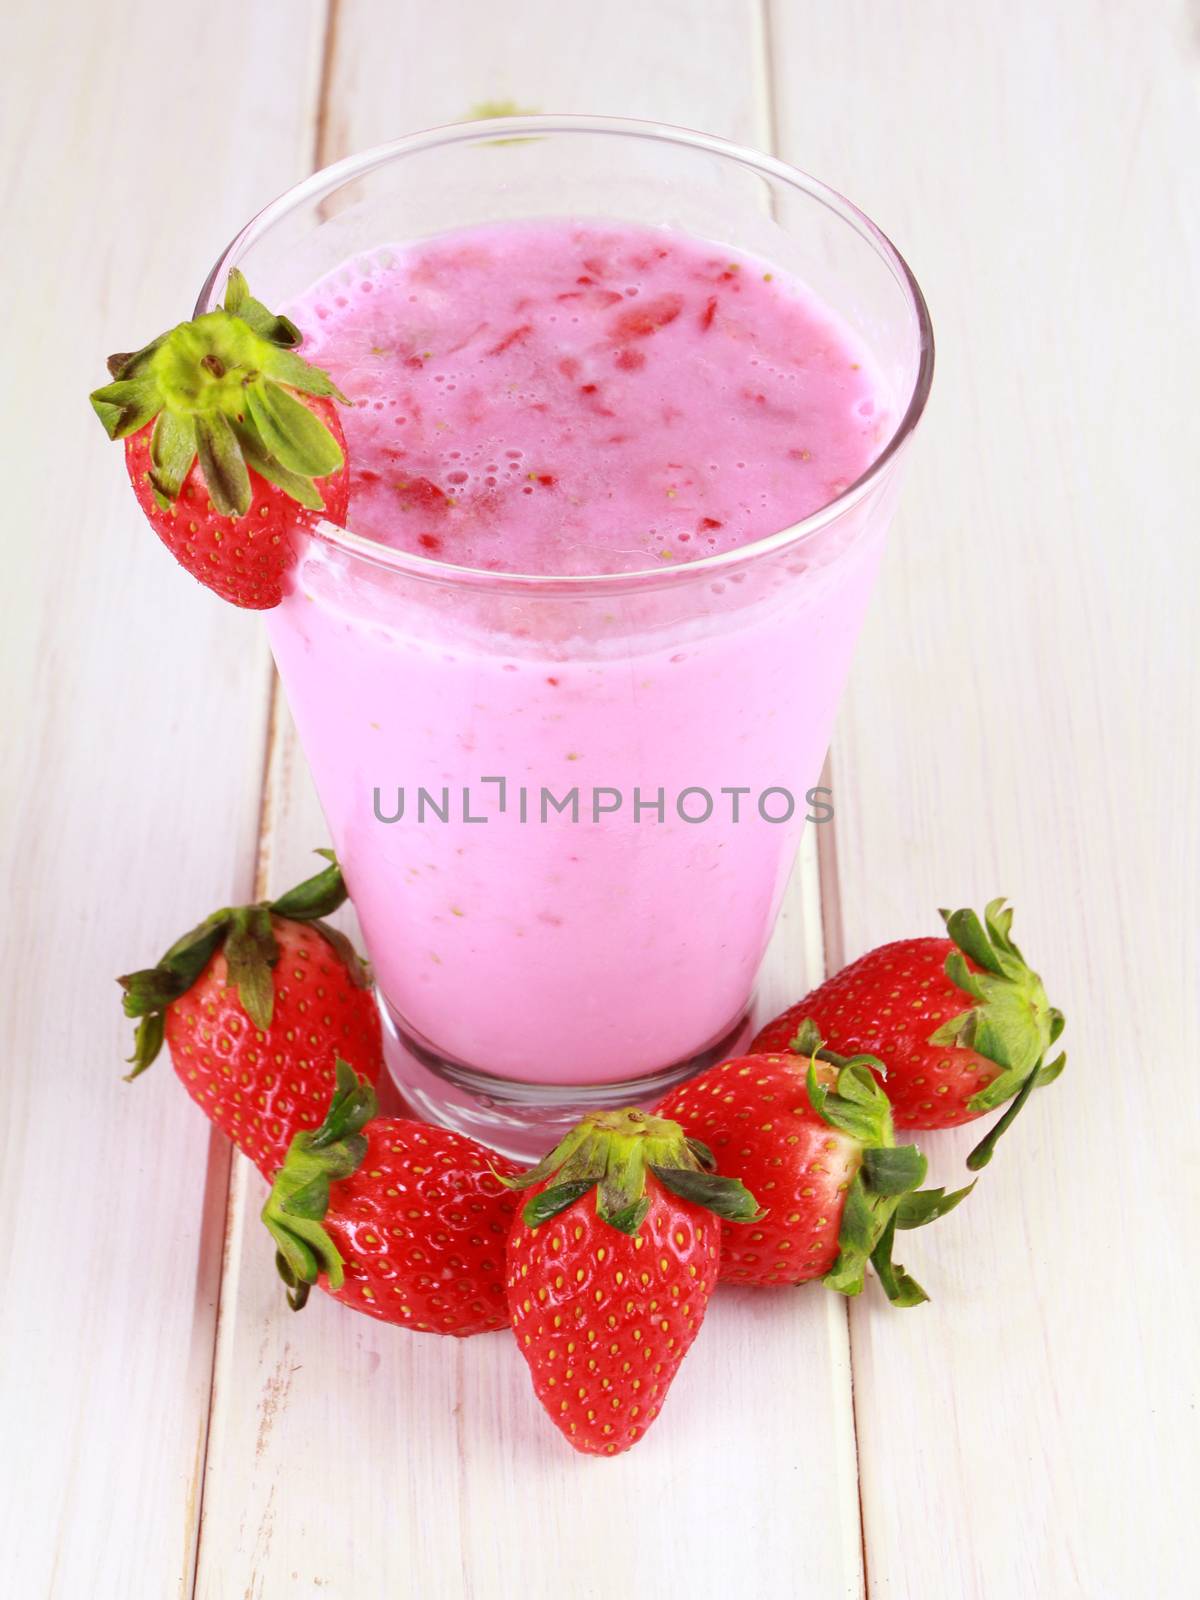 glass of strawberry smoothie on a wooden background by wyoosumran